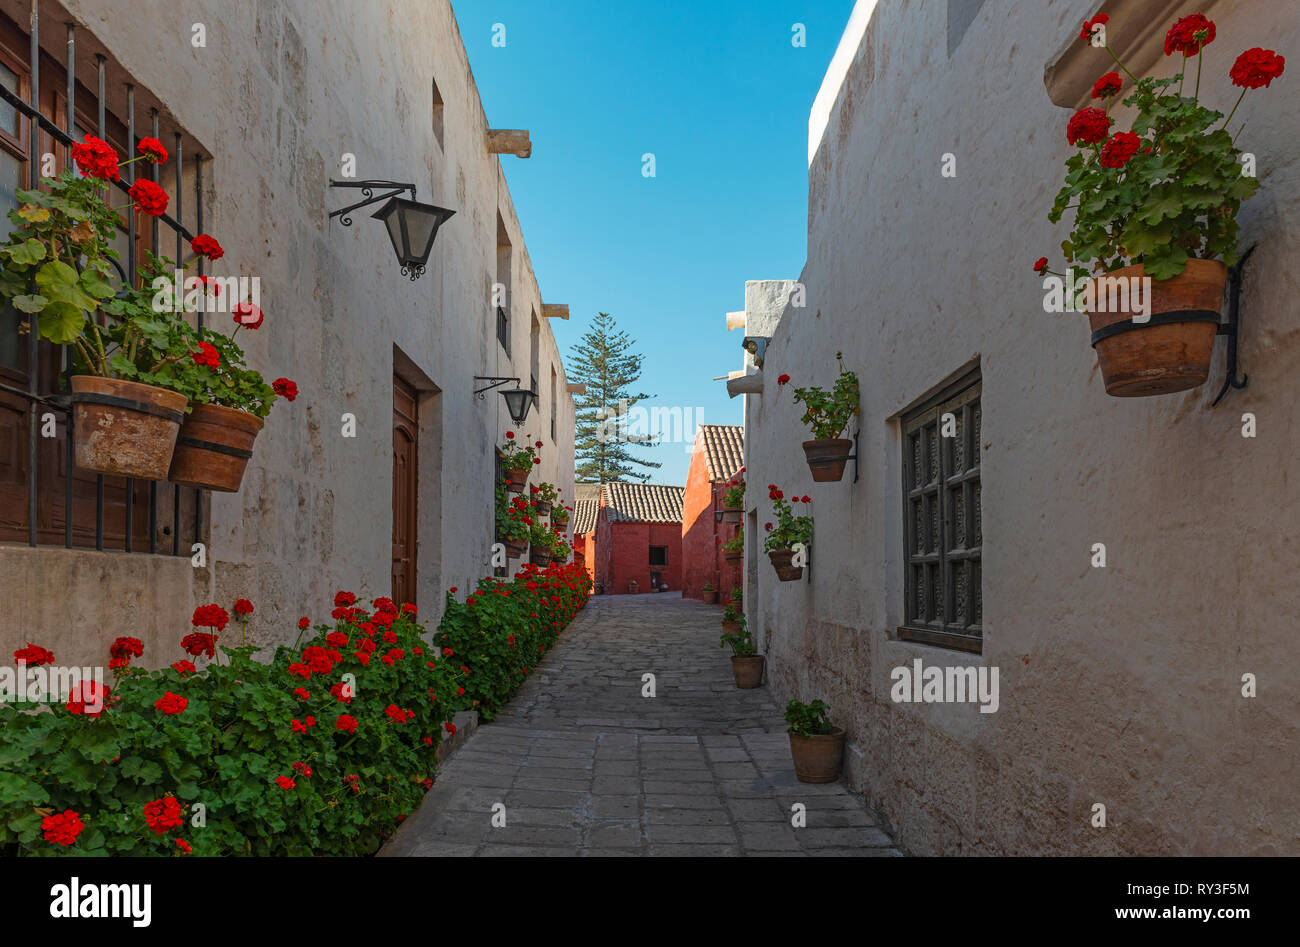 An alley with red geranium flowers inside the Santa Catalina Convent, famous for its cloister nuns, in the city center of Arequipa, Peru. Stock Photo